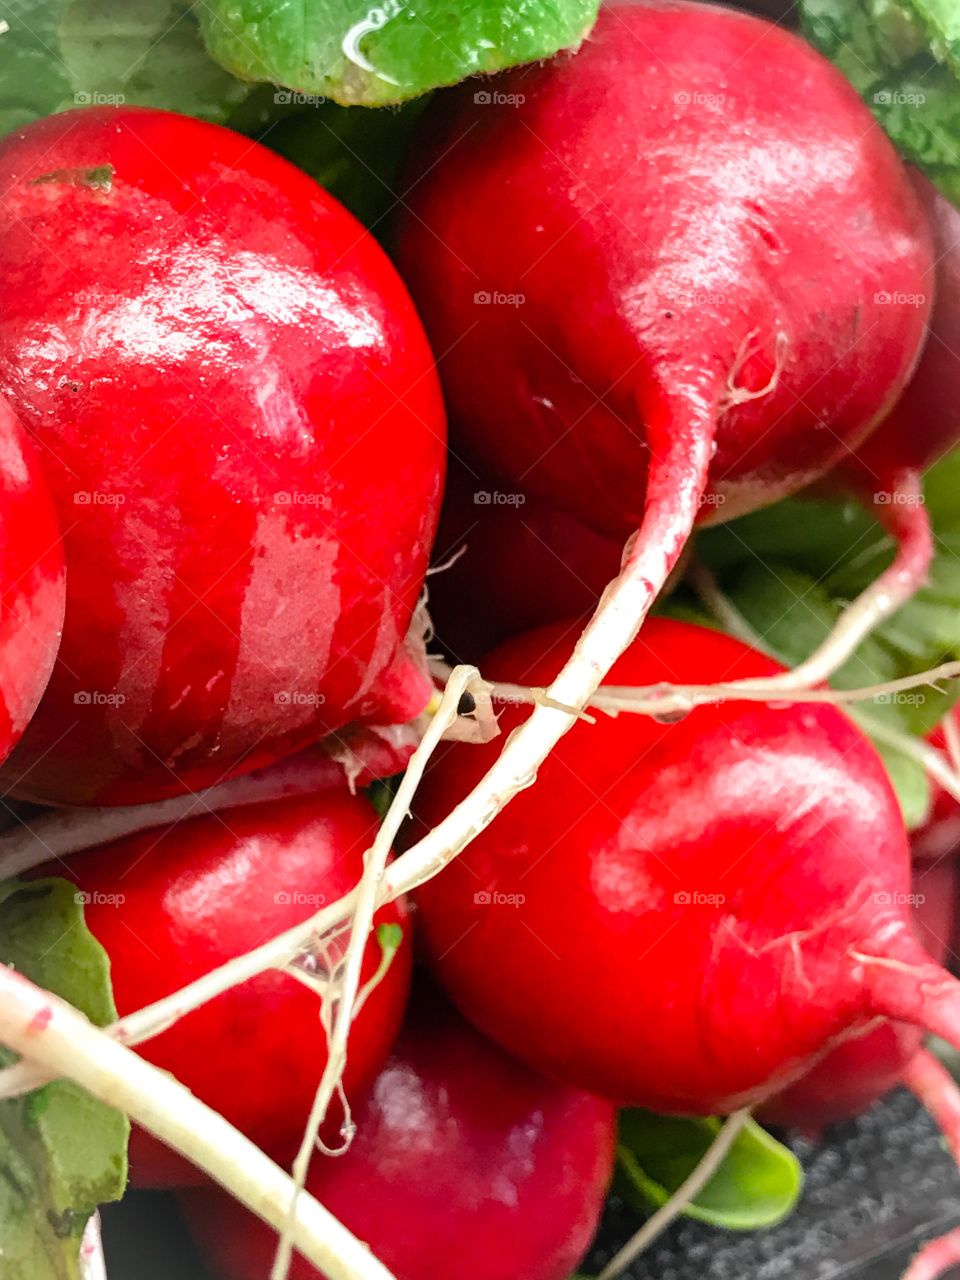 Radishes add a touch of zing to any salad as well as a bright red freshness. 